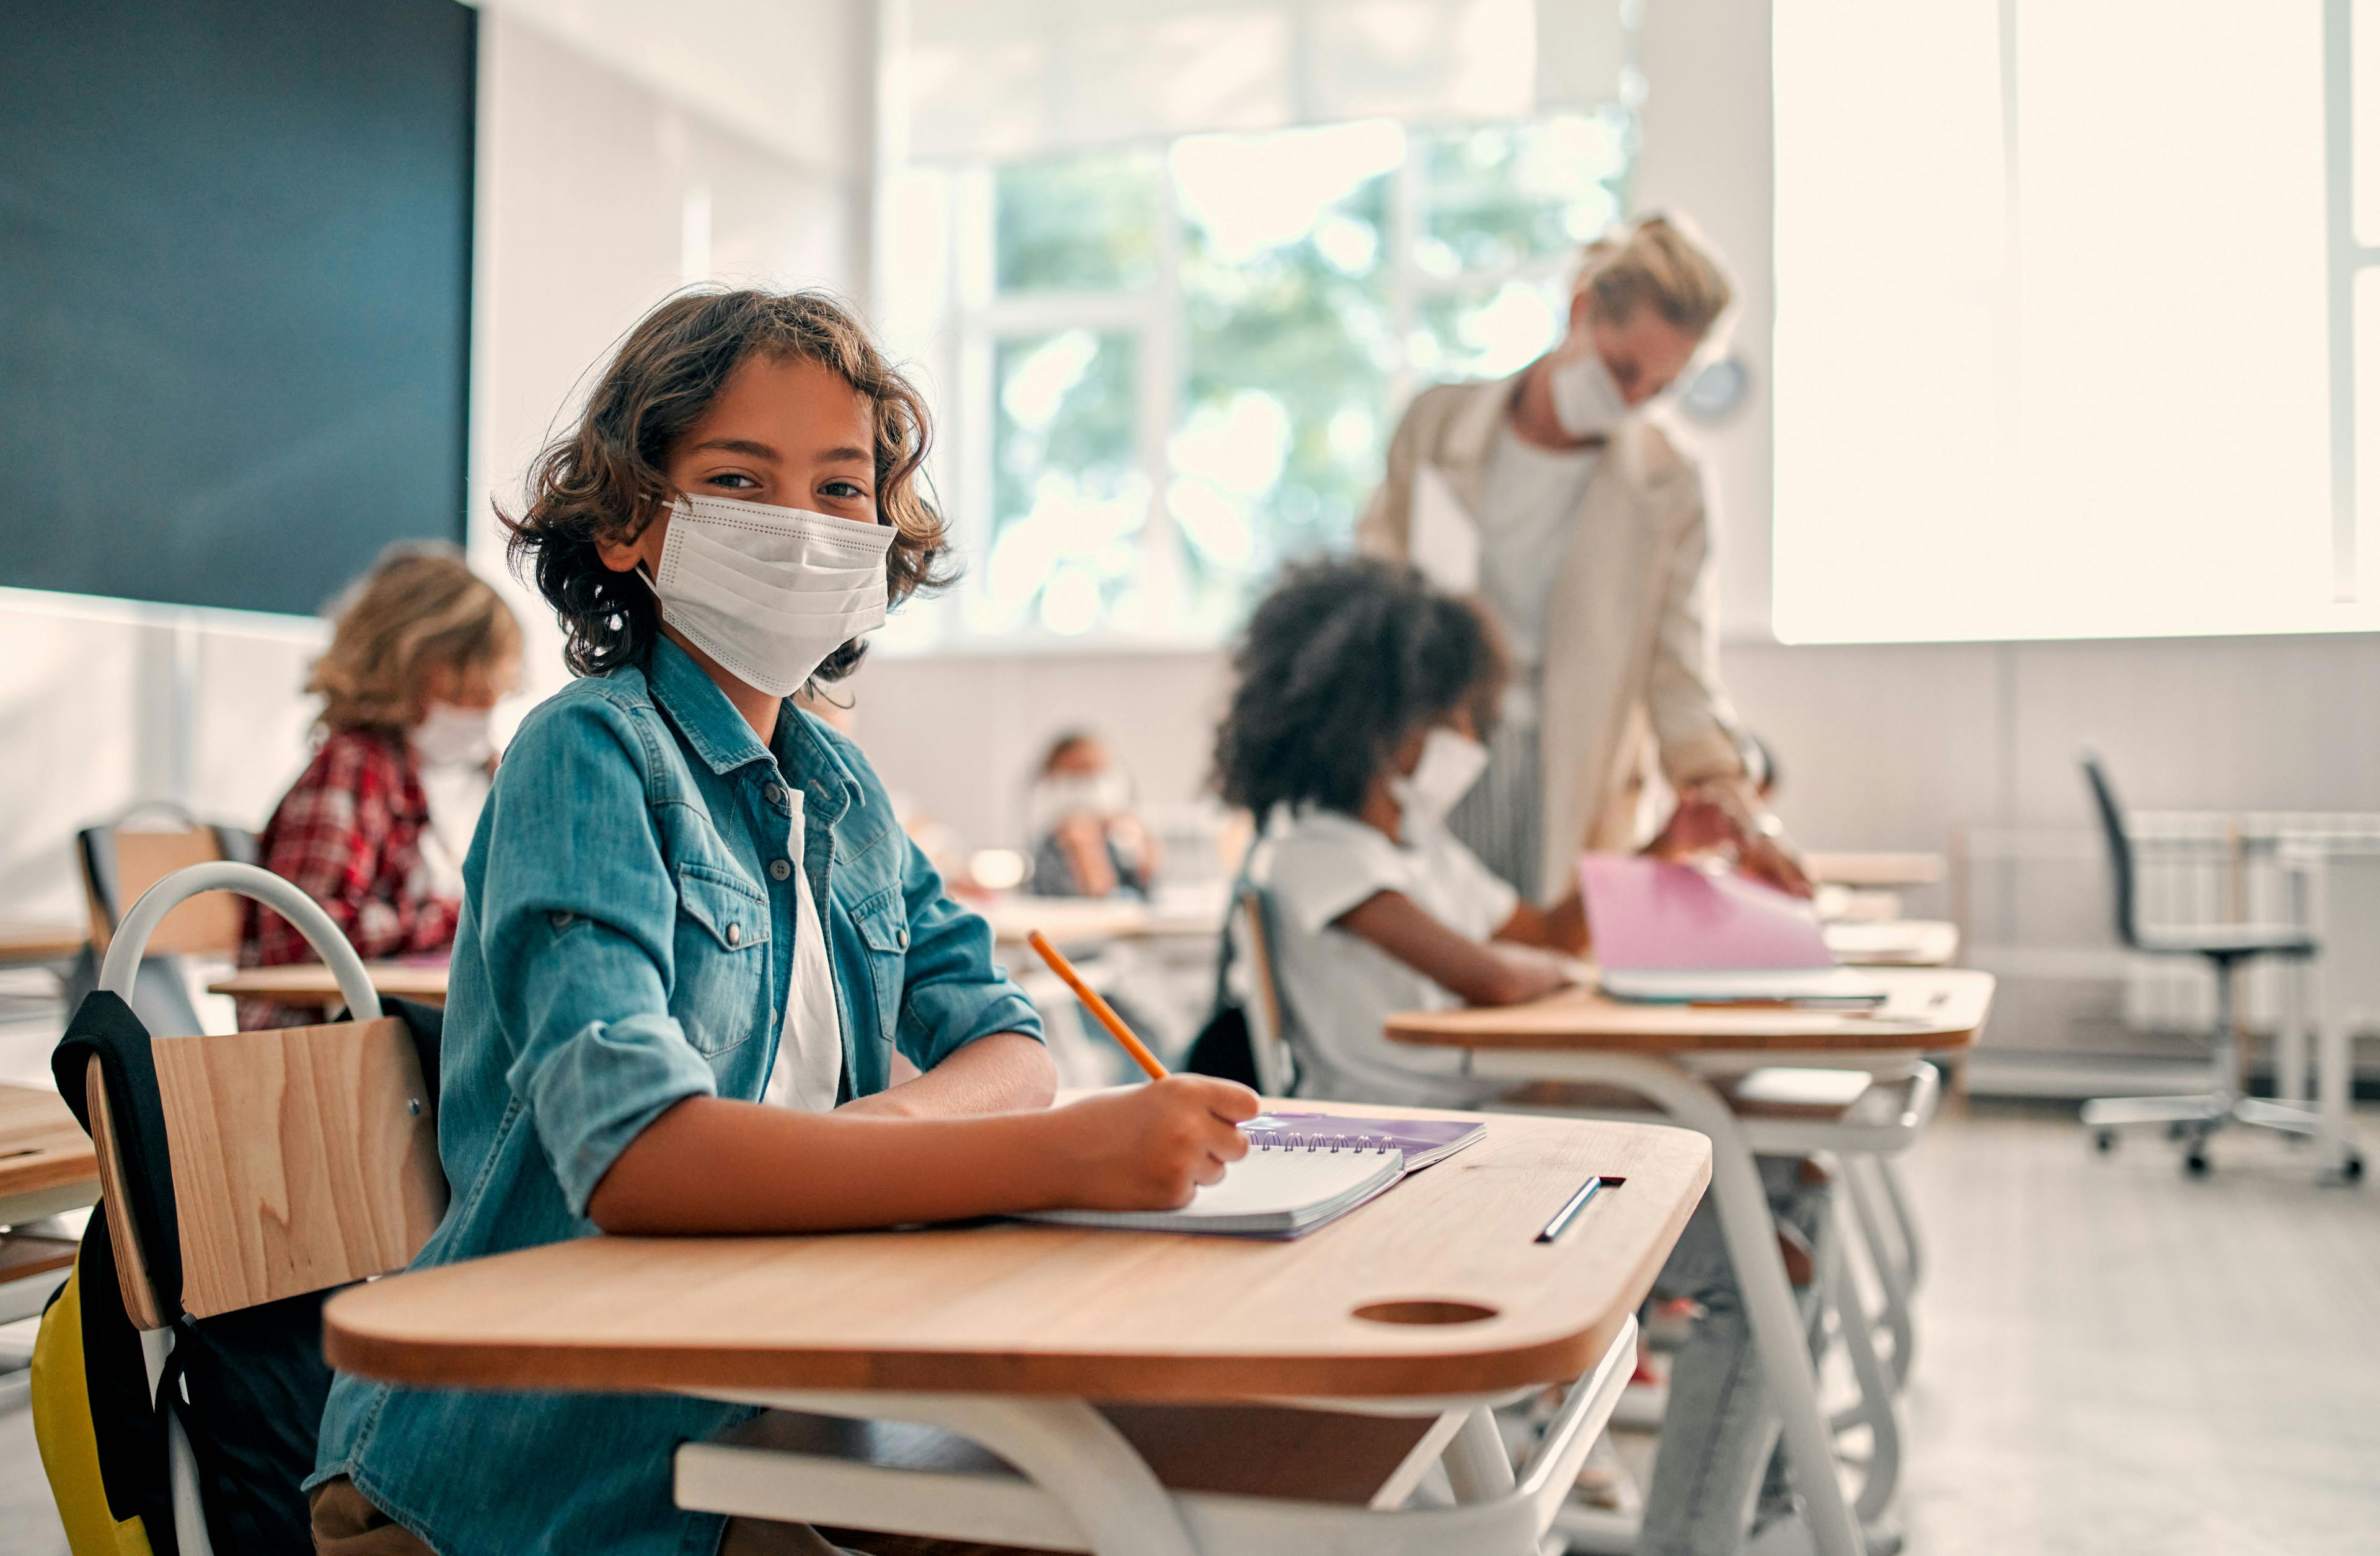 In Boston school districts, lifting mask mandates was correlated with an additional 44.8 COVID-19 infections per 1000 students and staffers.